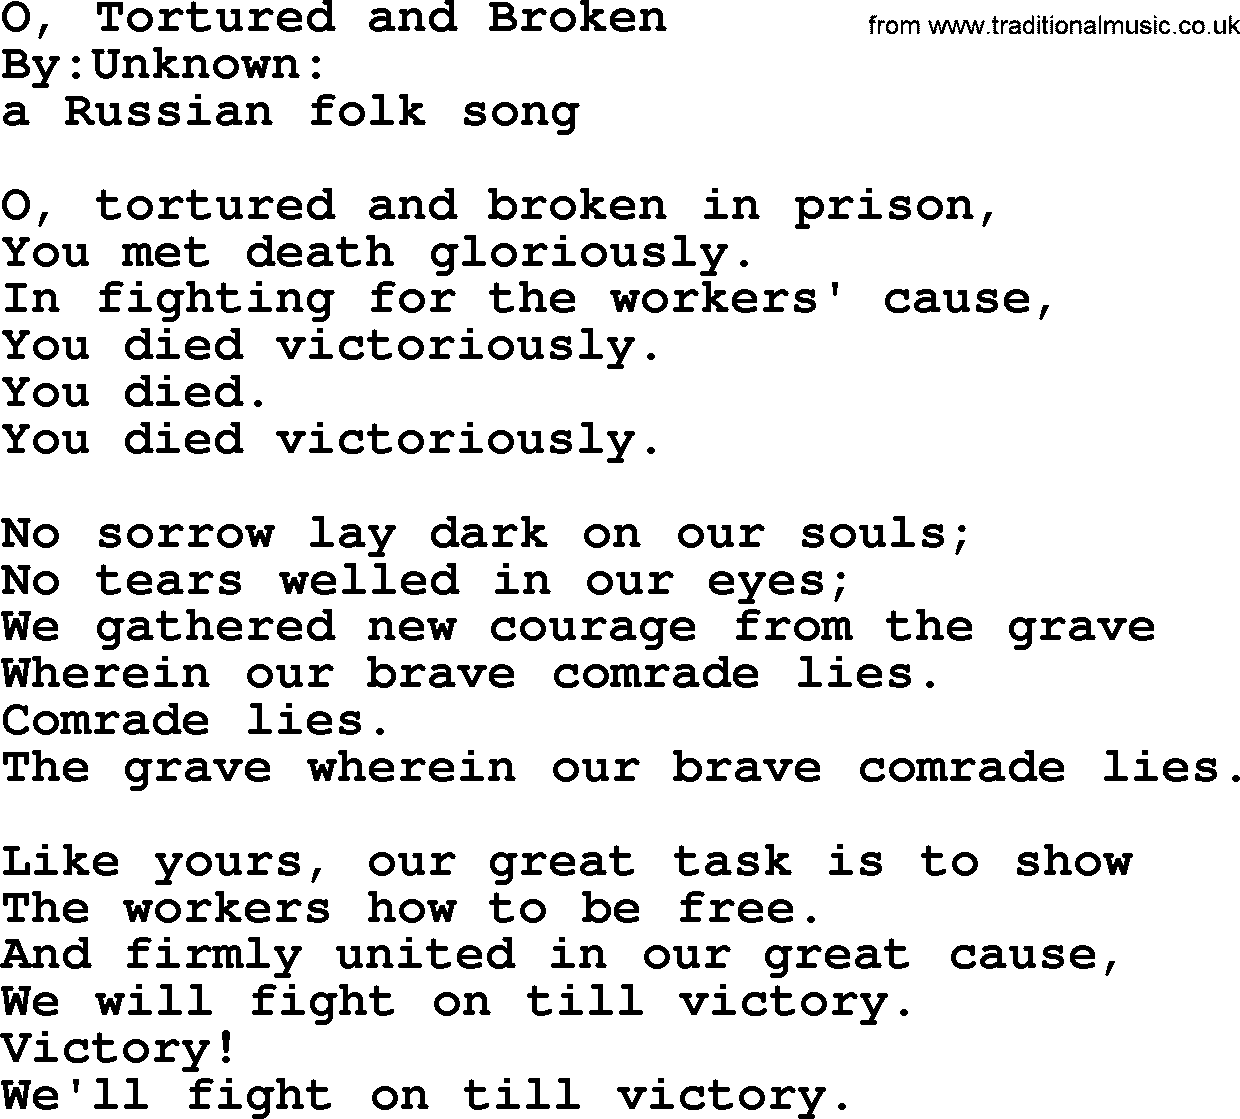 Political, Solidarity, Workers or Union song: O Tortured And Broken, lyrics